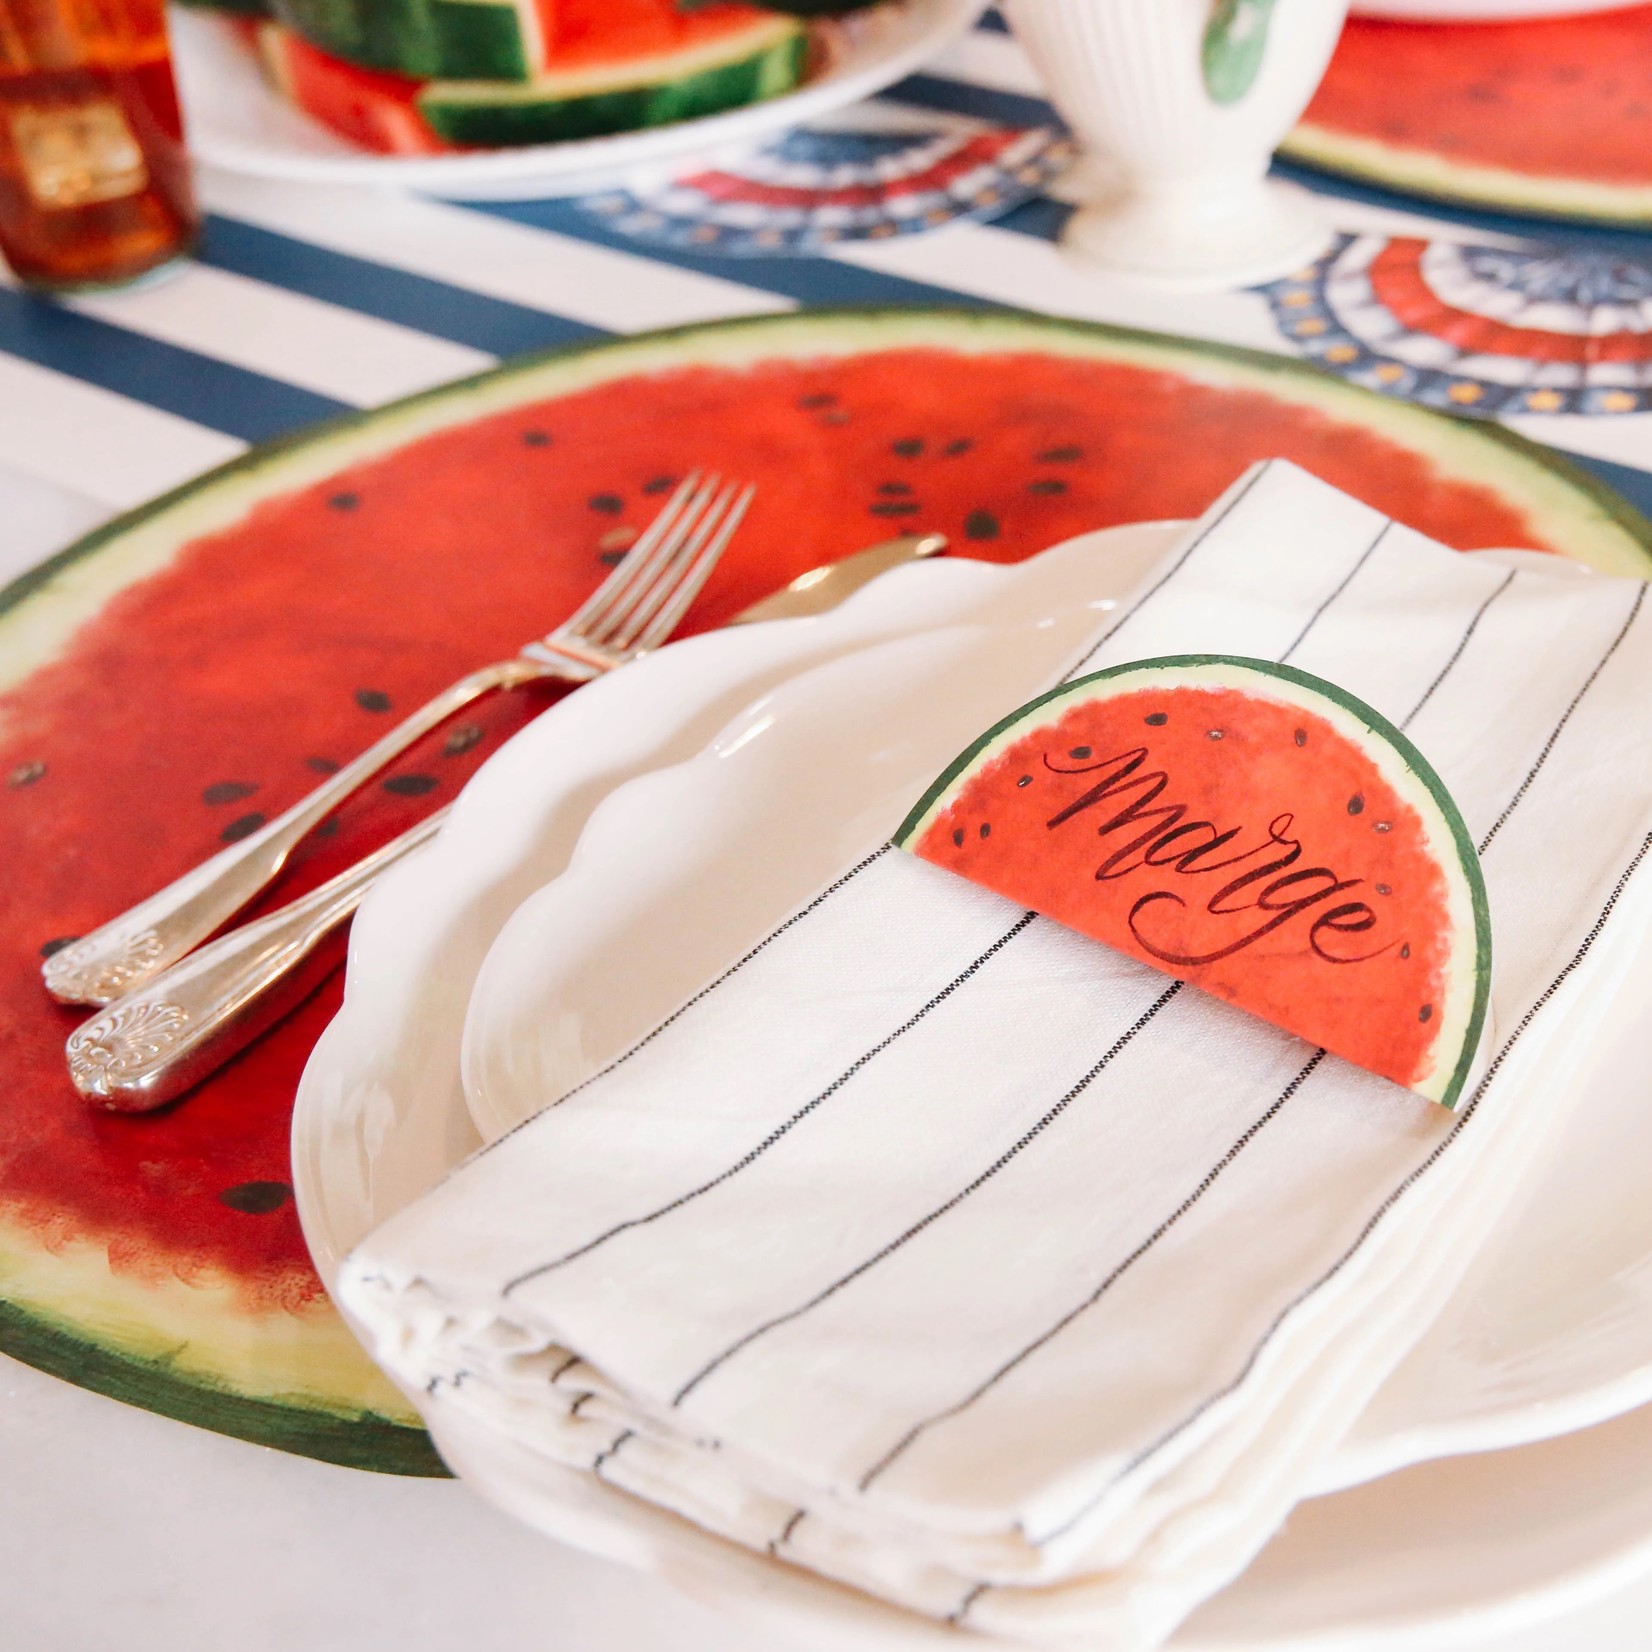 Hester & Cook Die Cut Watermelon Placemat